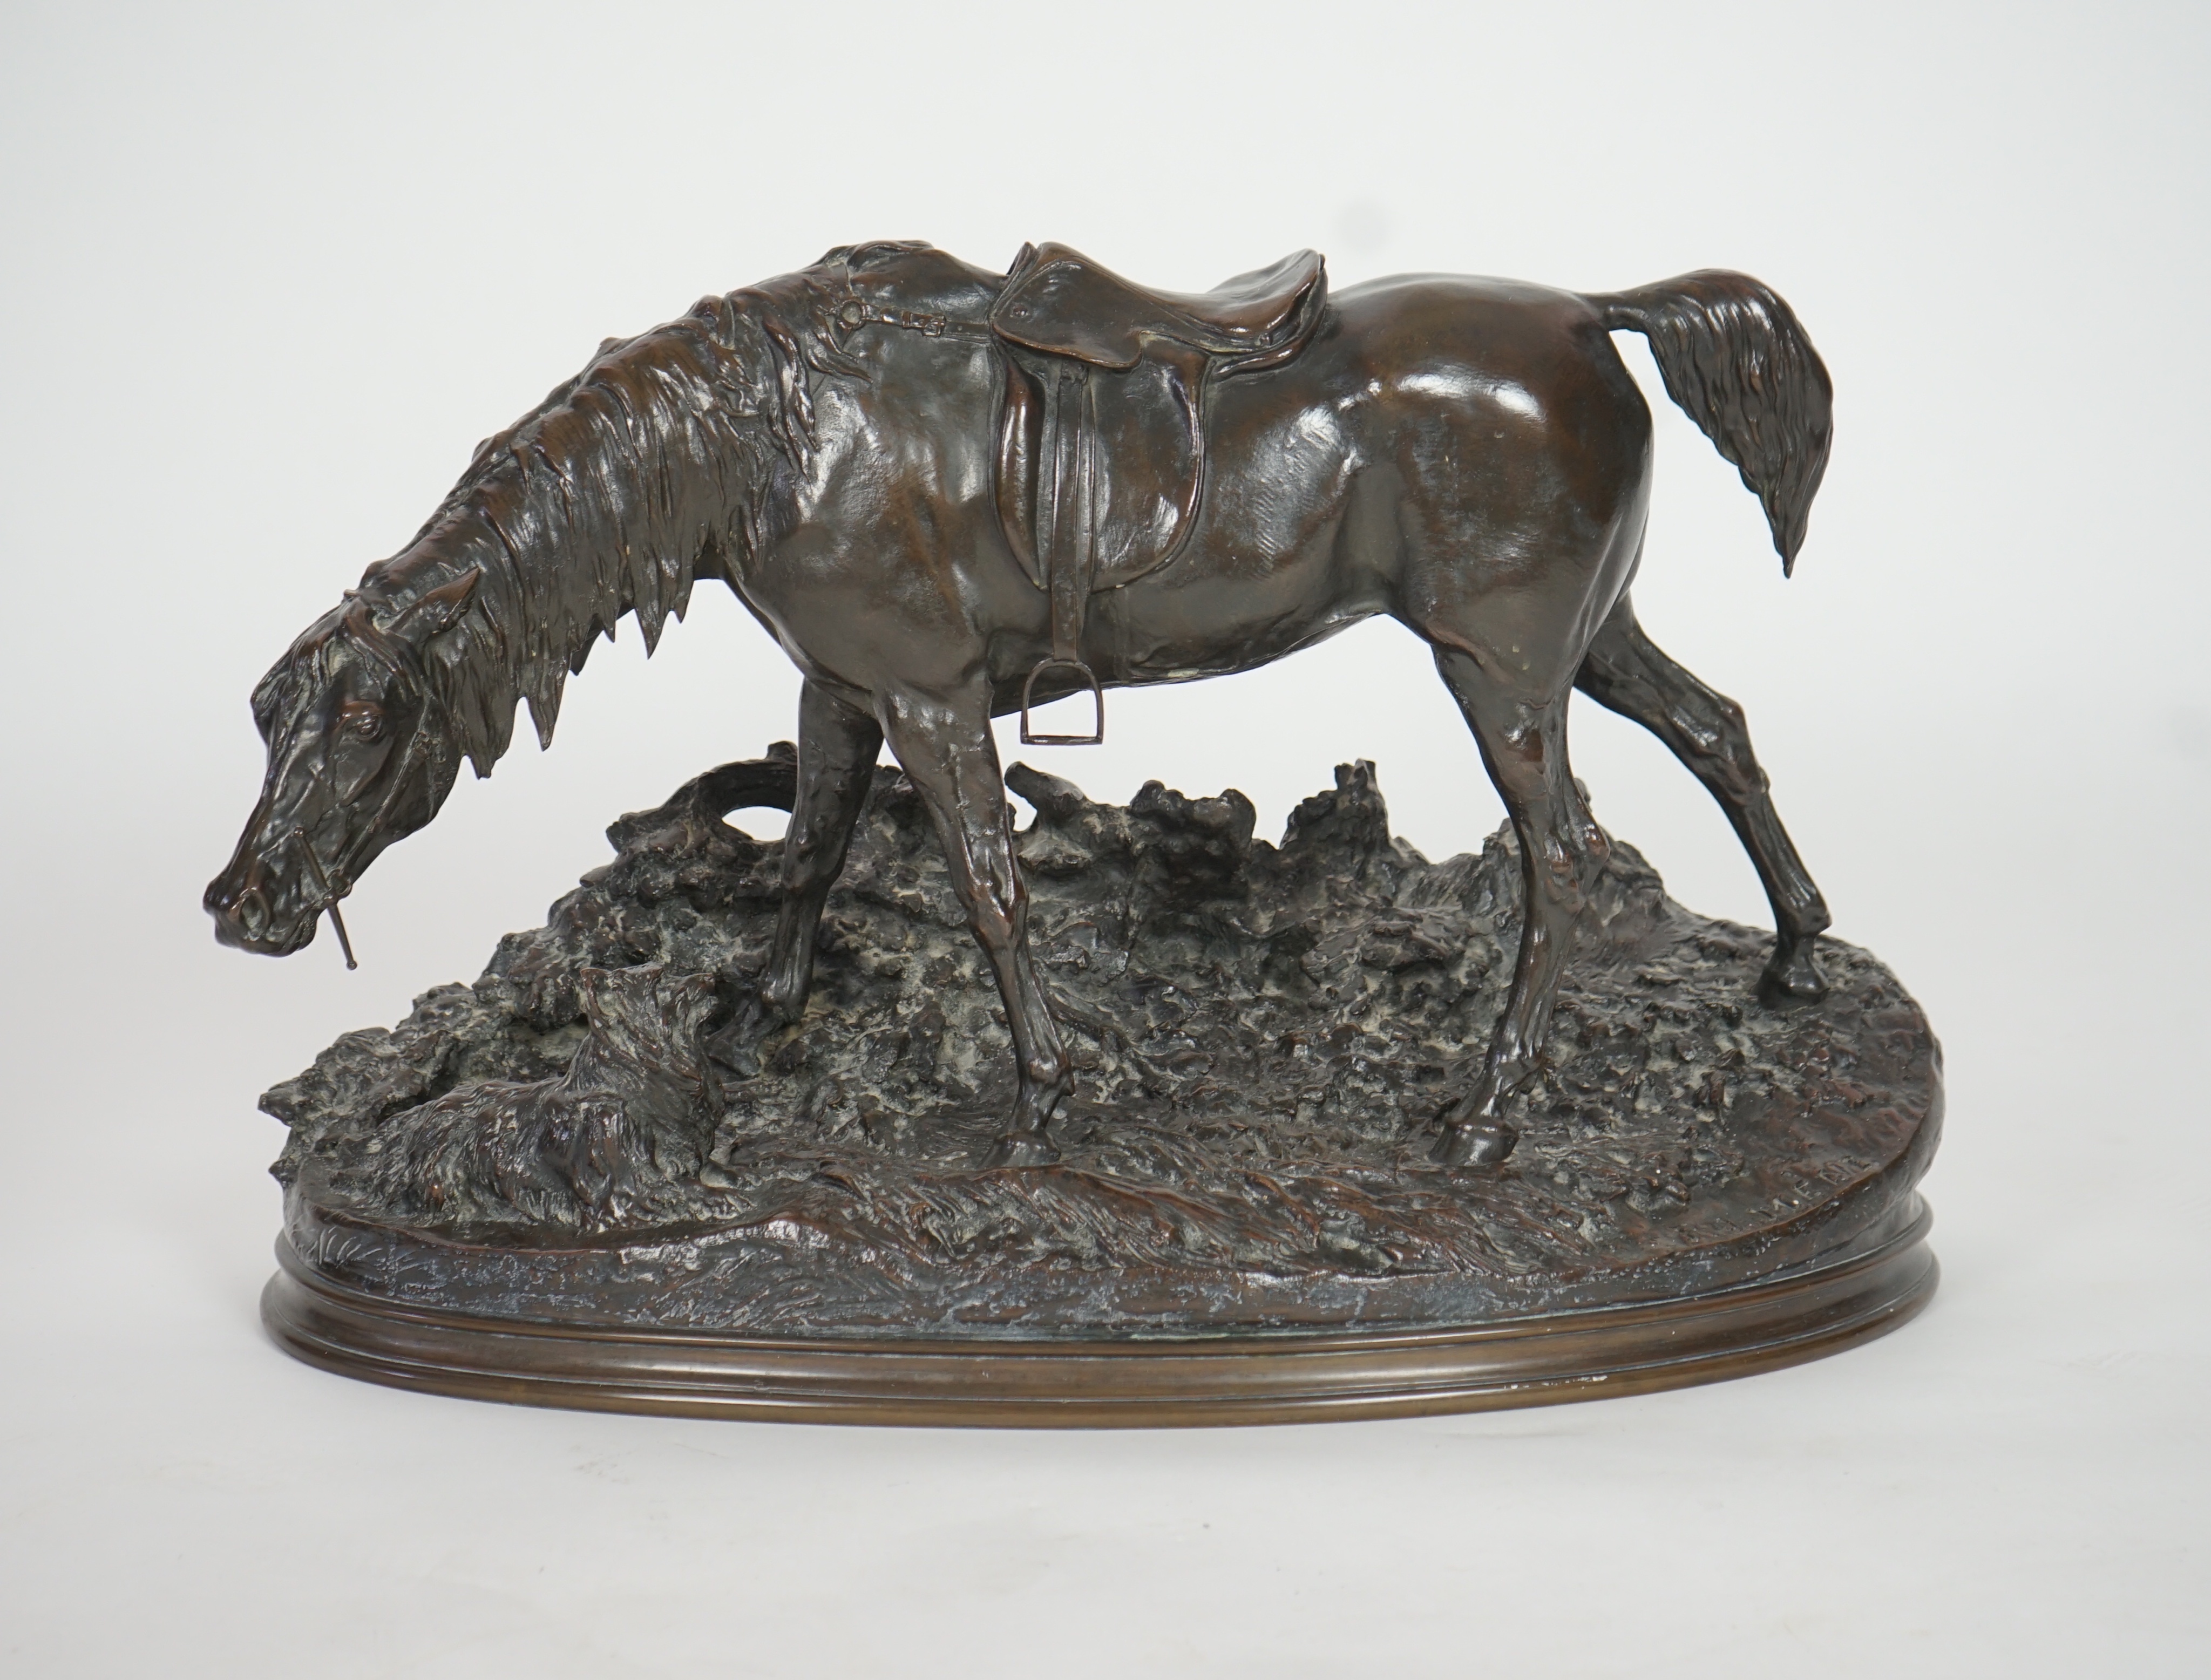 Pierre Jules Mène (French, 1810-1879). A bronze group of a saddled horse standing upon a mound with a terrier at its feet, width 69cm, height 43cm